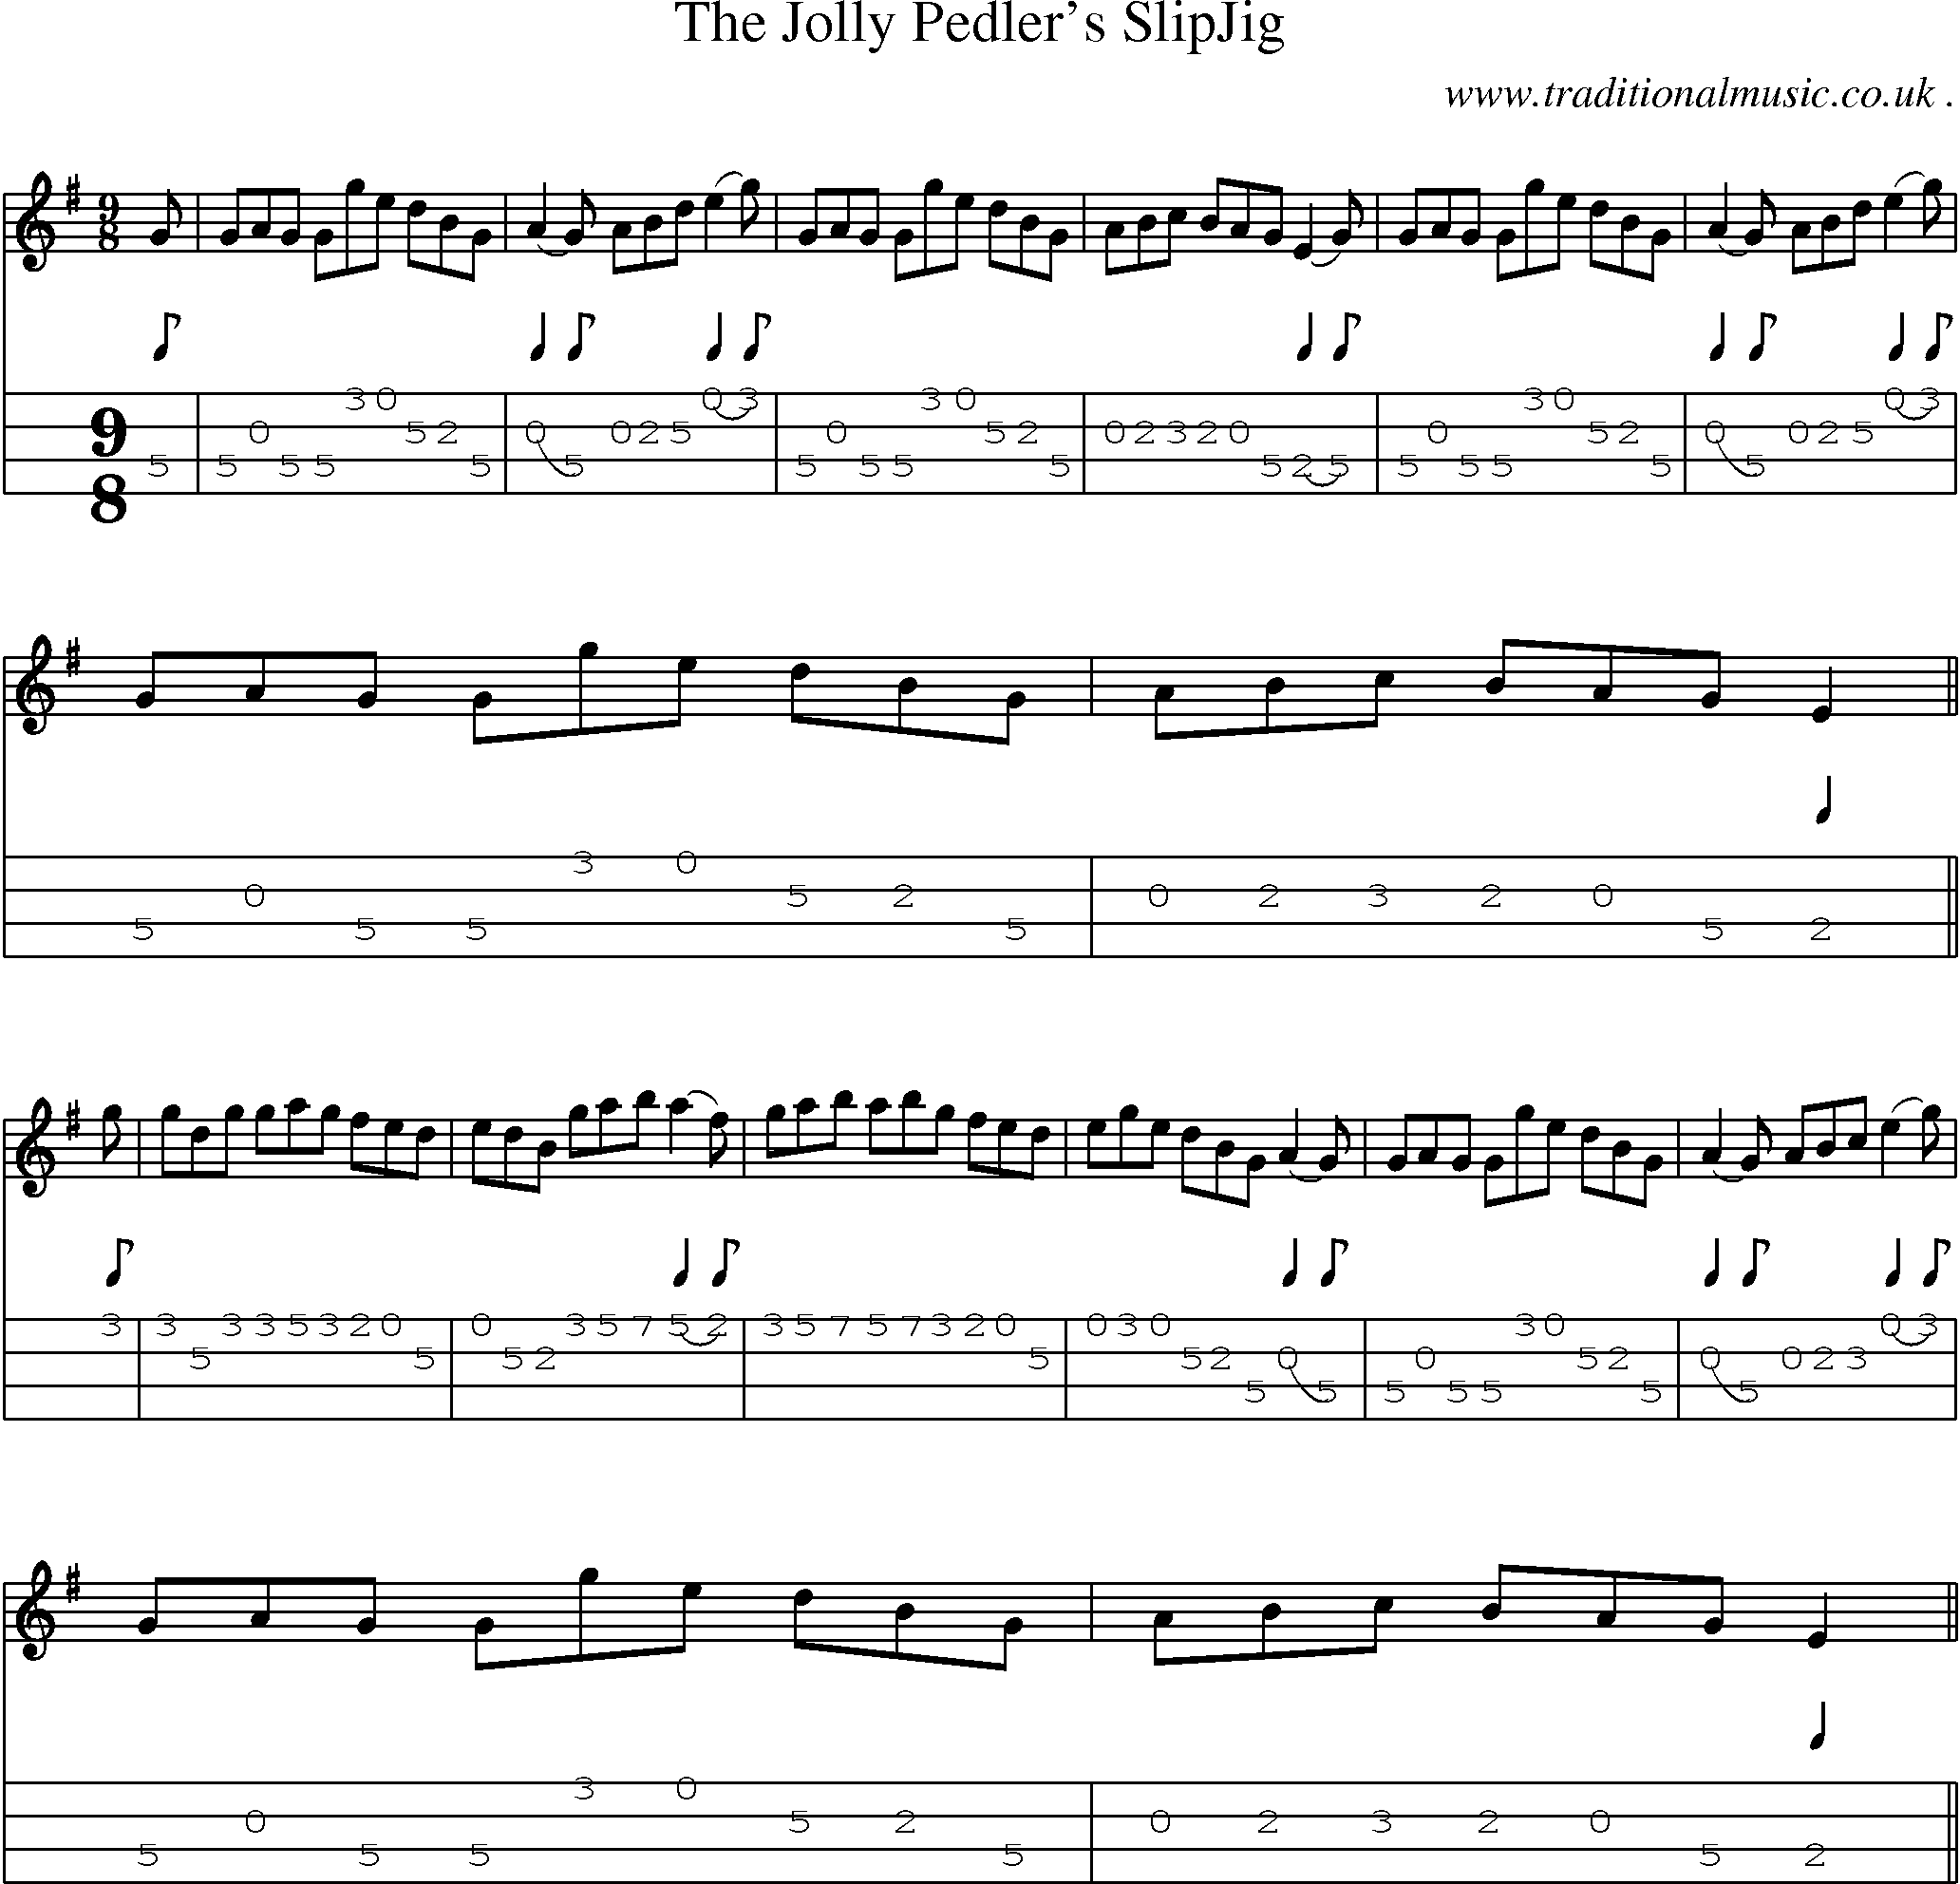 Sheet-Music and Mandolin Tabs for The Jolly Pedlers Slipjig